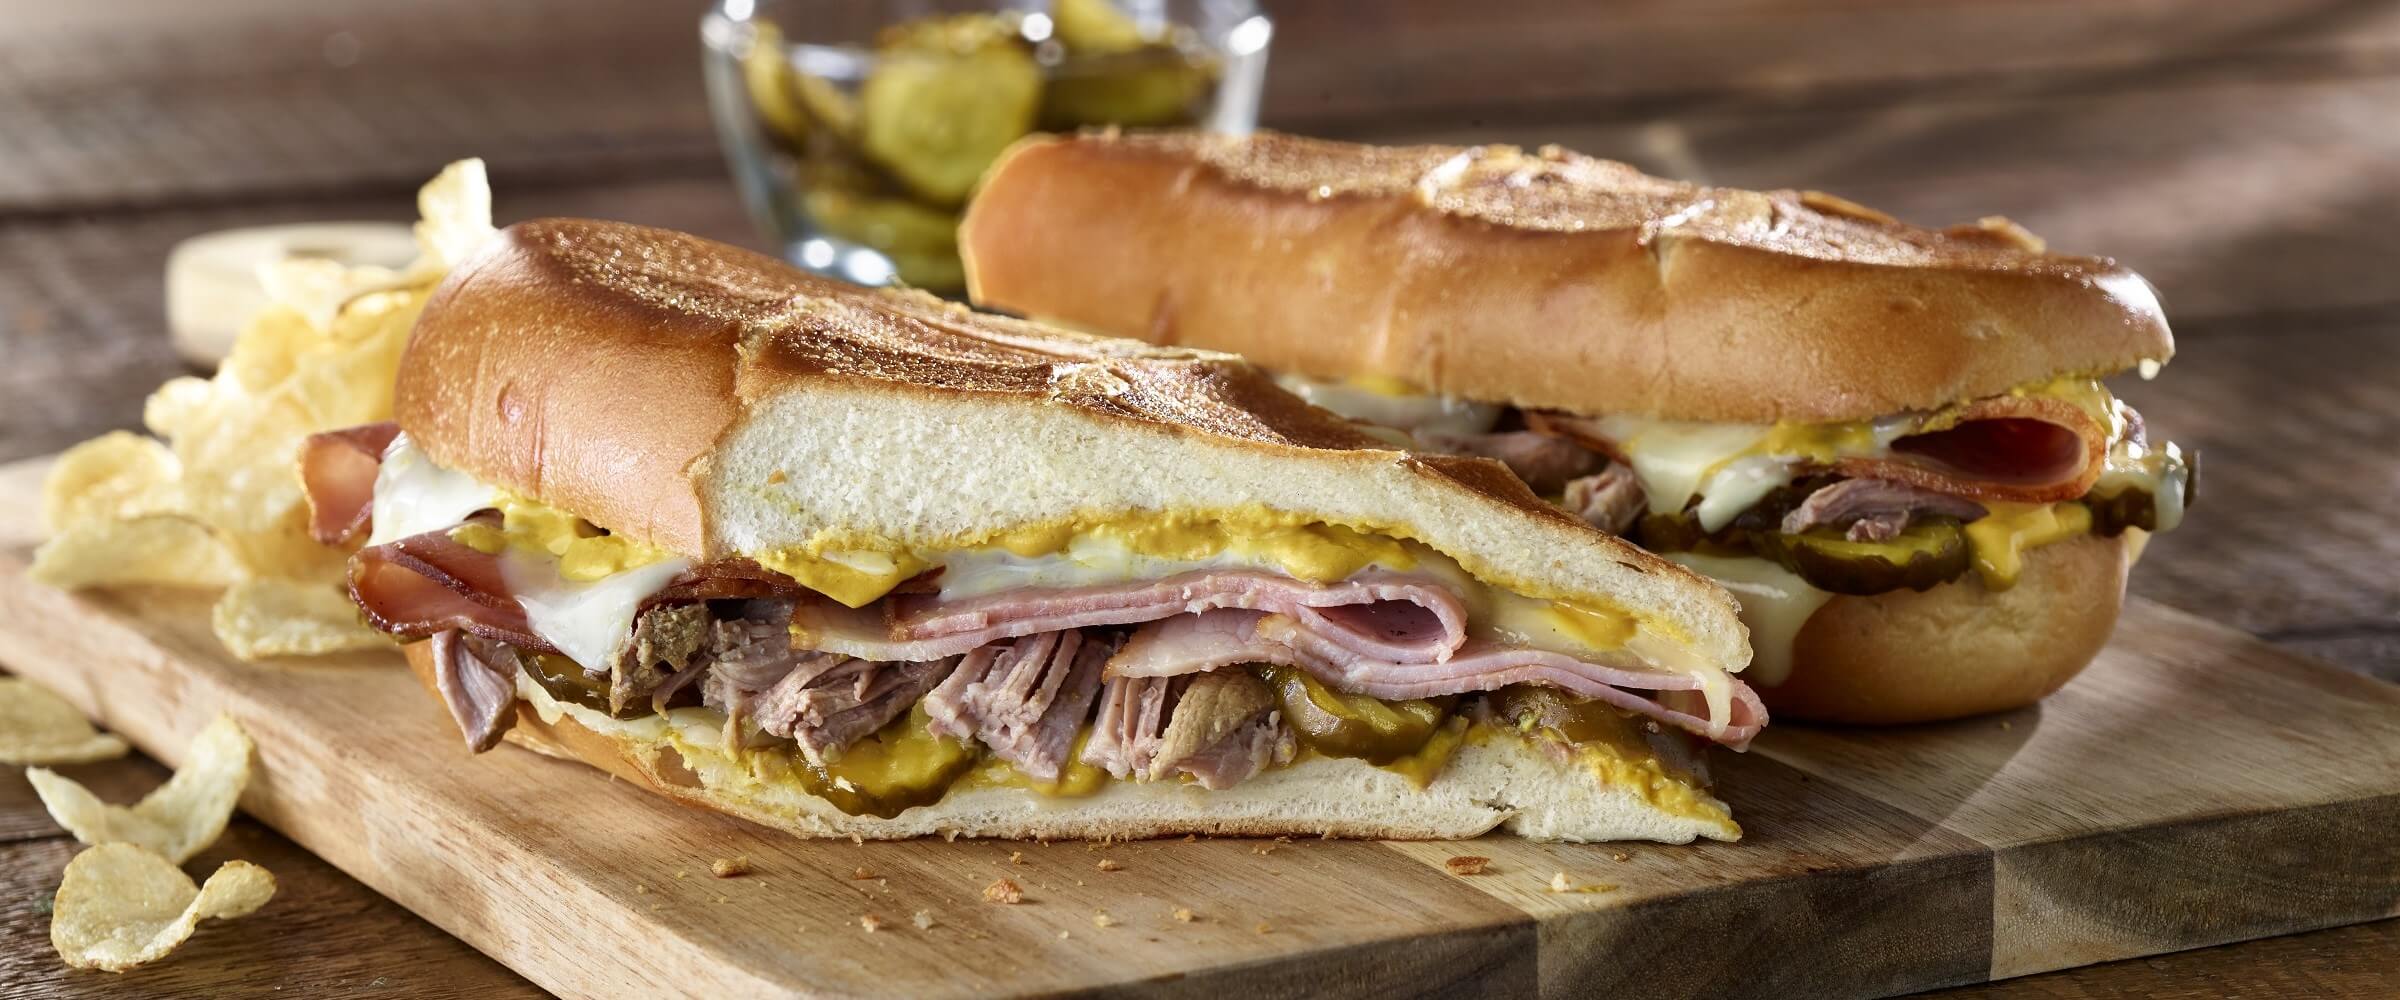 ham cubano sandwich on cutting board with chips on side